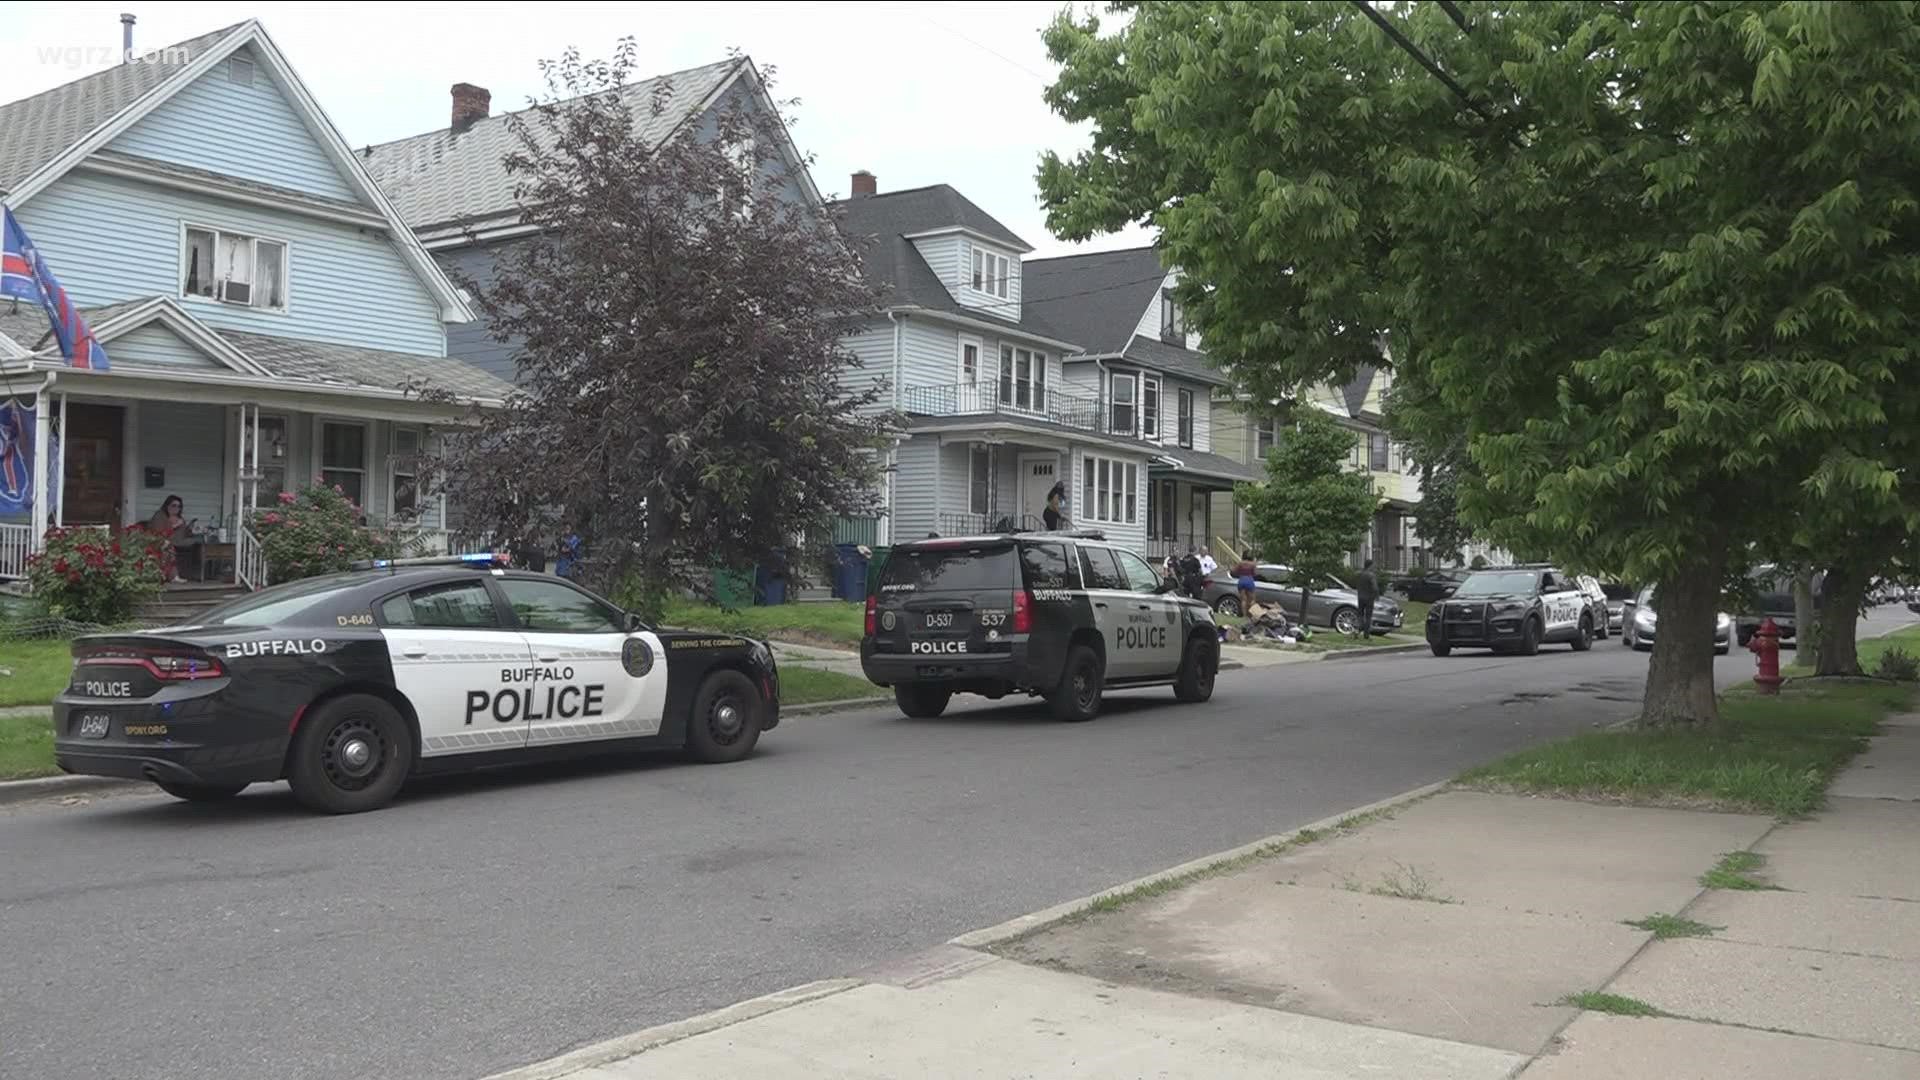 Buffalo police say someone shot the 40-year-old man several times inside a home on Grote Street.